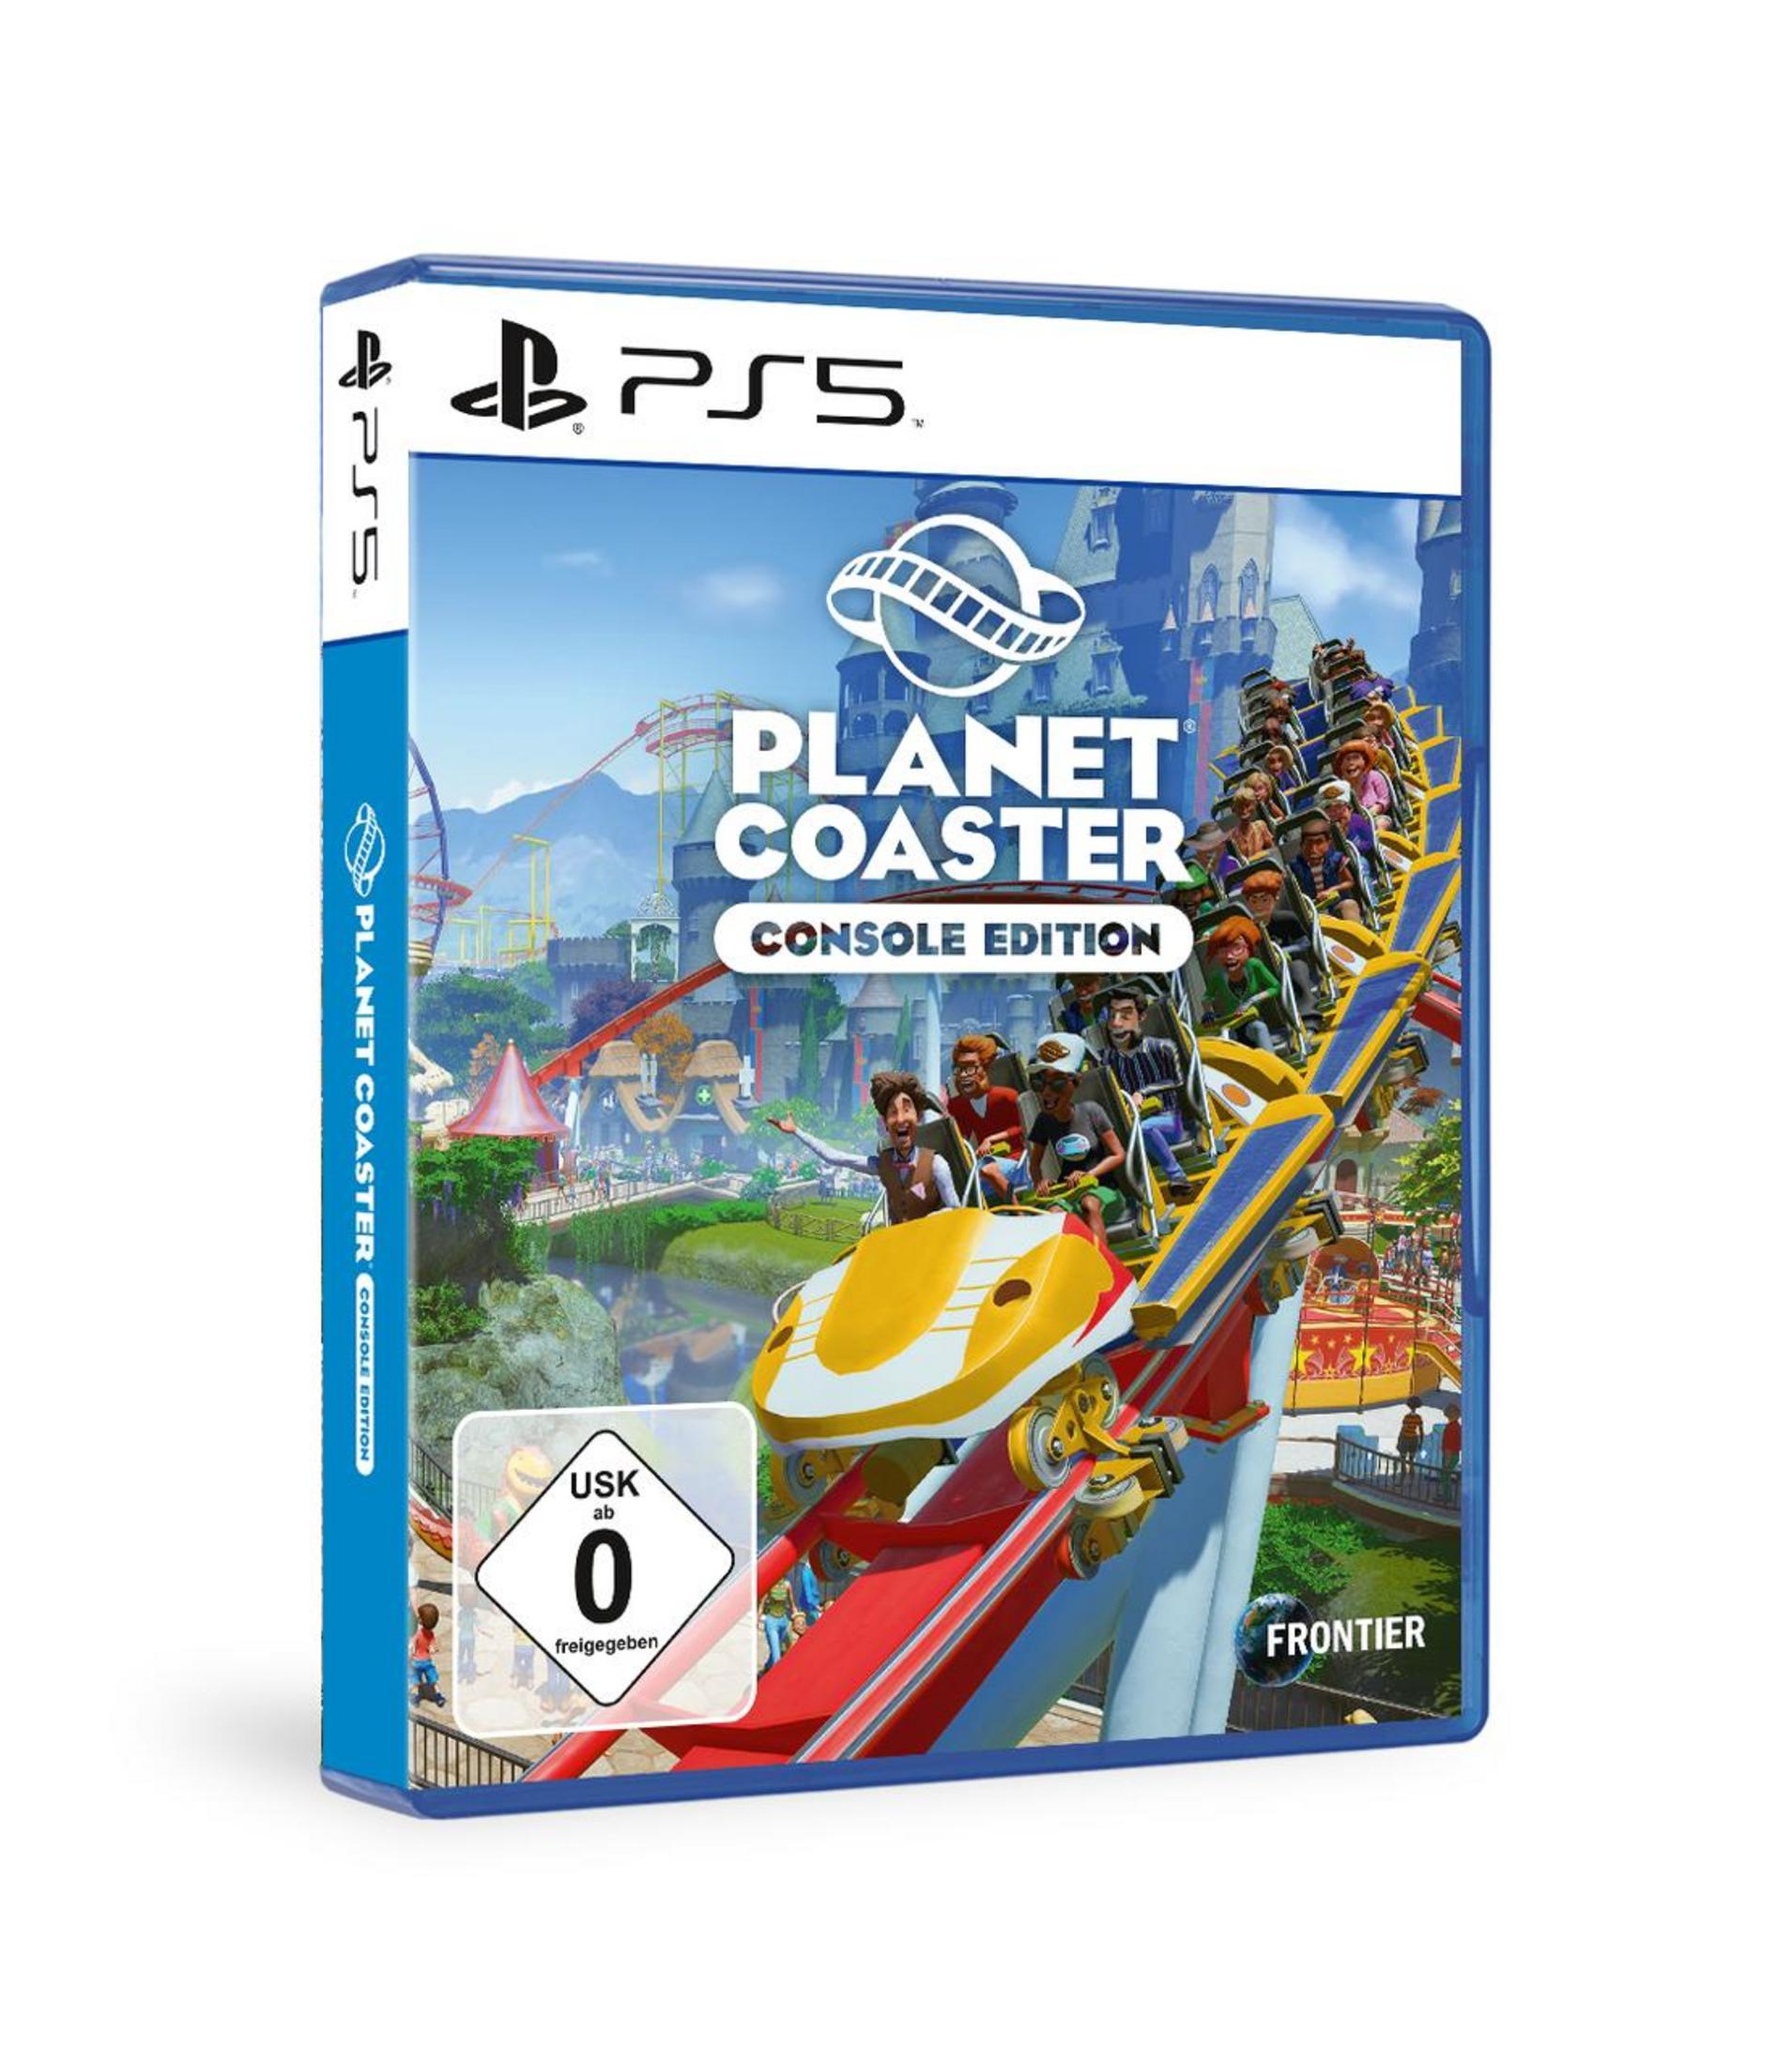 - [PlayStation Coaster 5] - Planet Edition Console